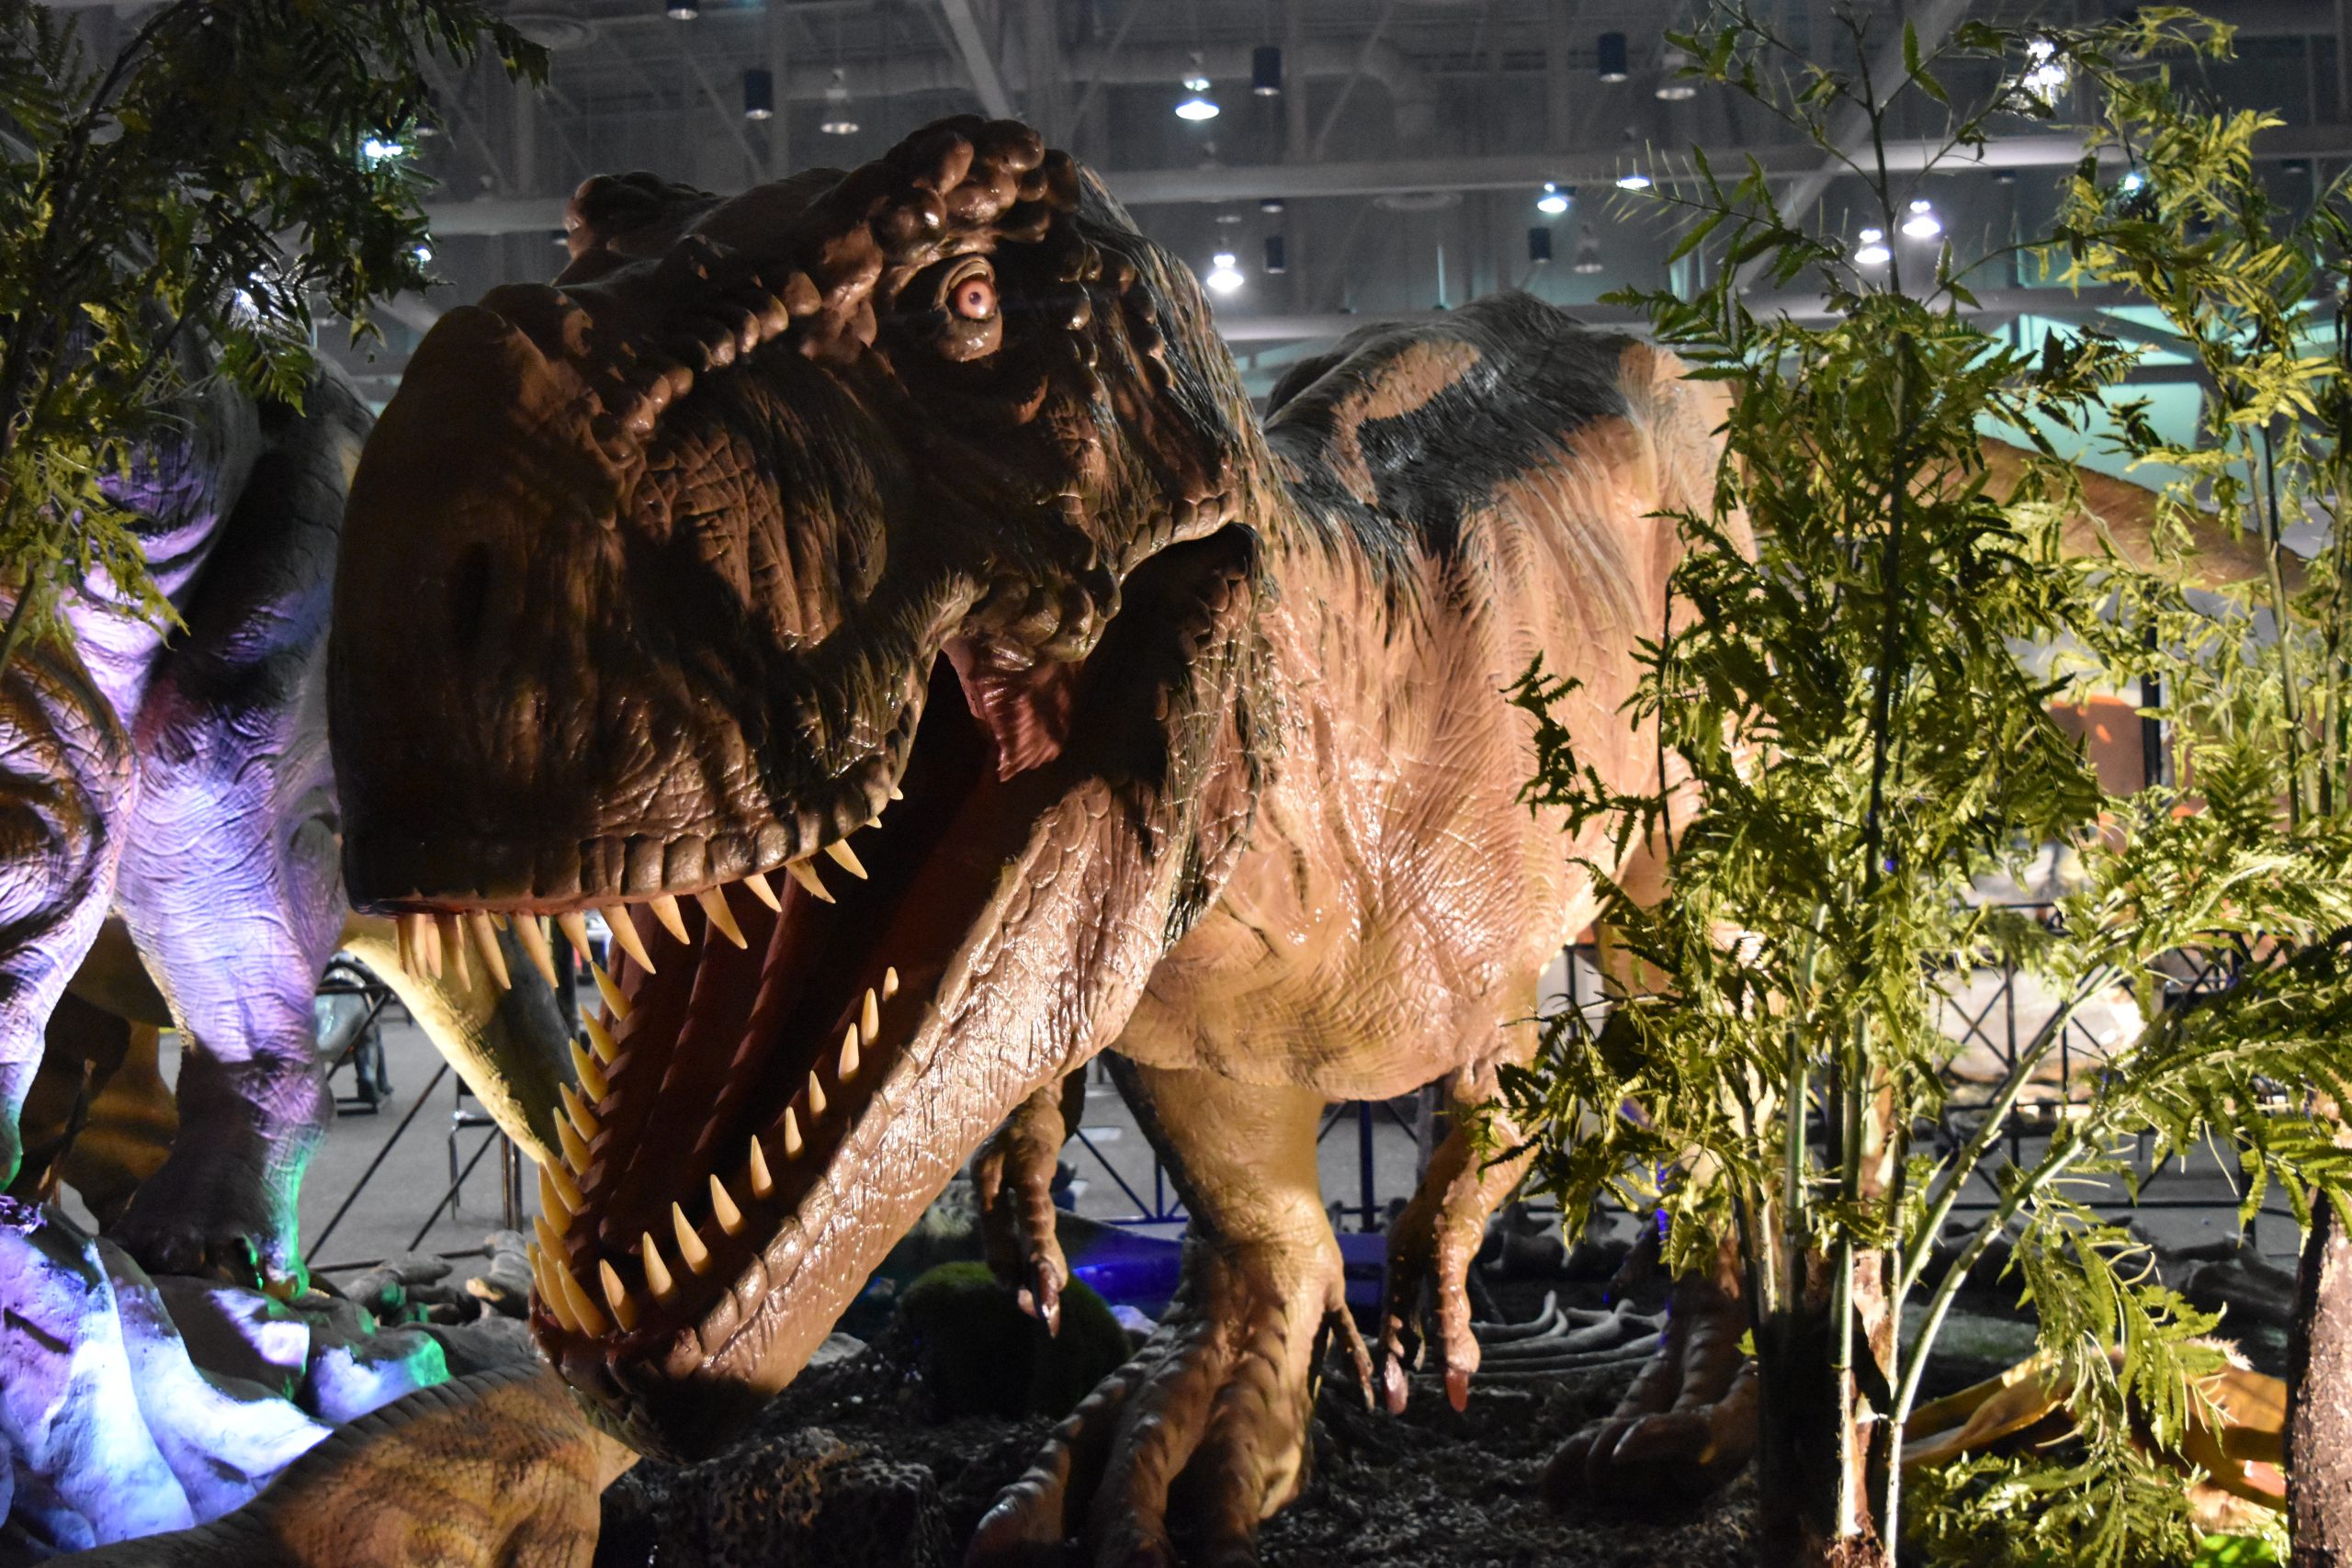 Jurassic Quest, Nation’s Biggest Dinosaur Experience, Migrates to Milwaukee for New Year – Tickets on Sale Now